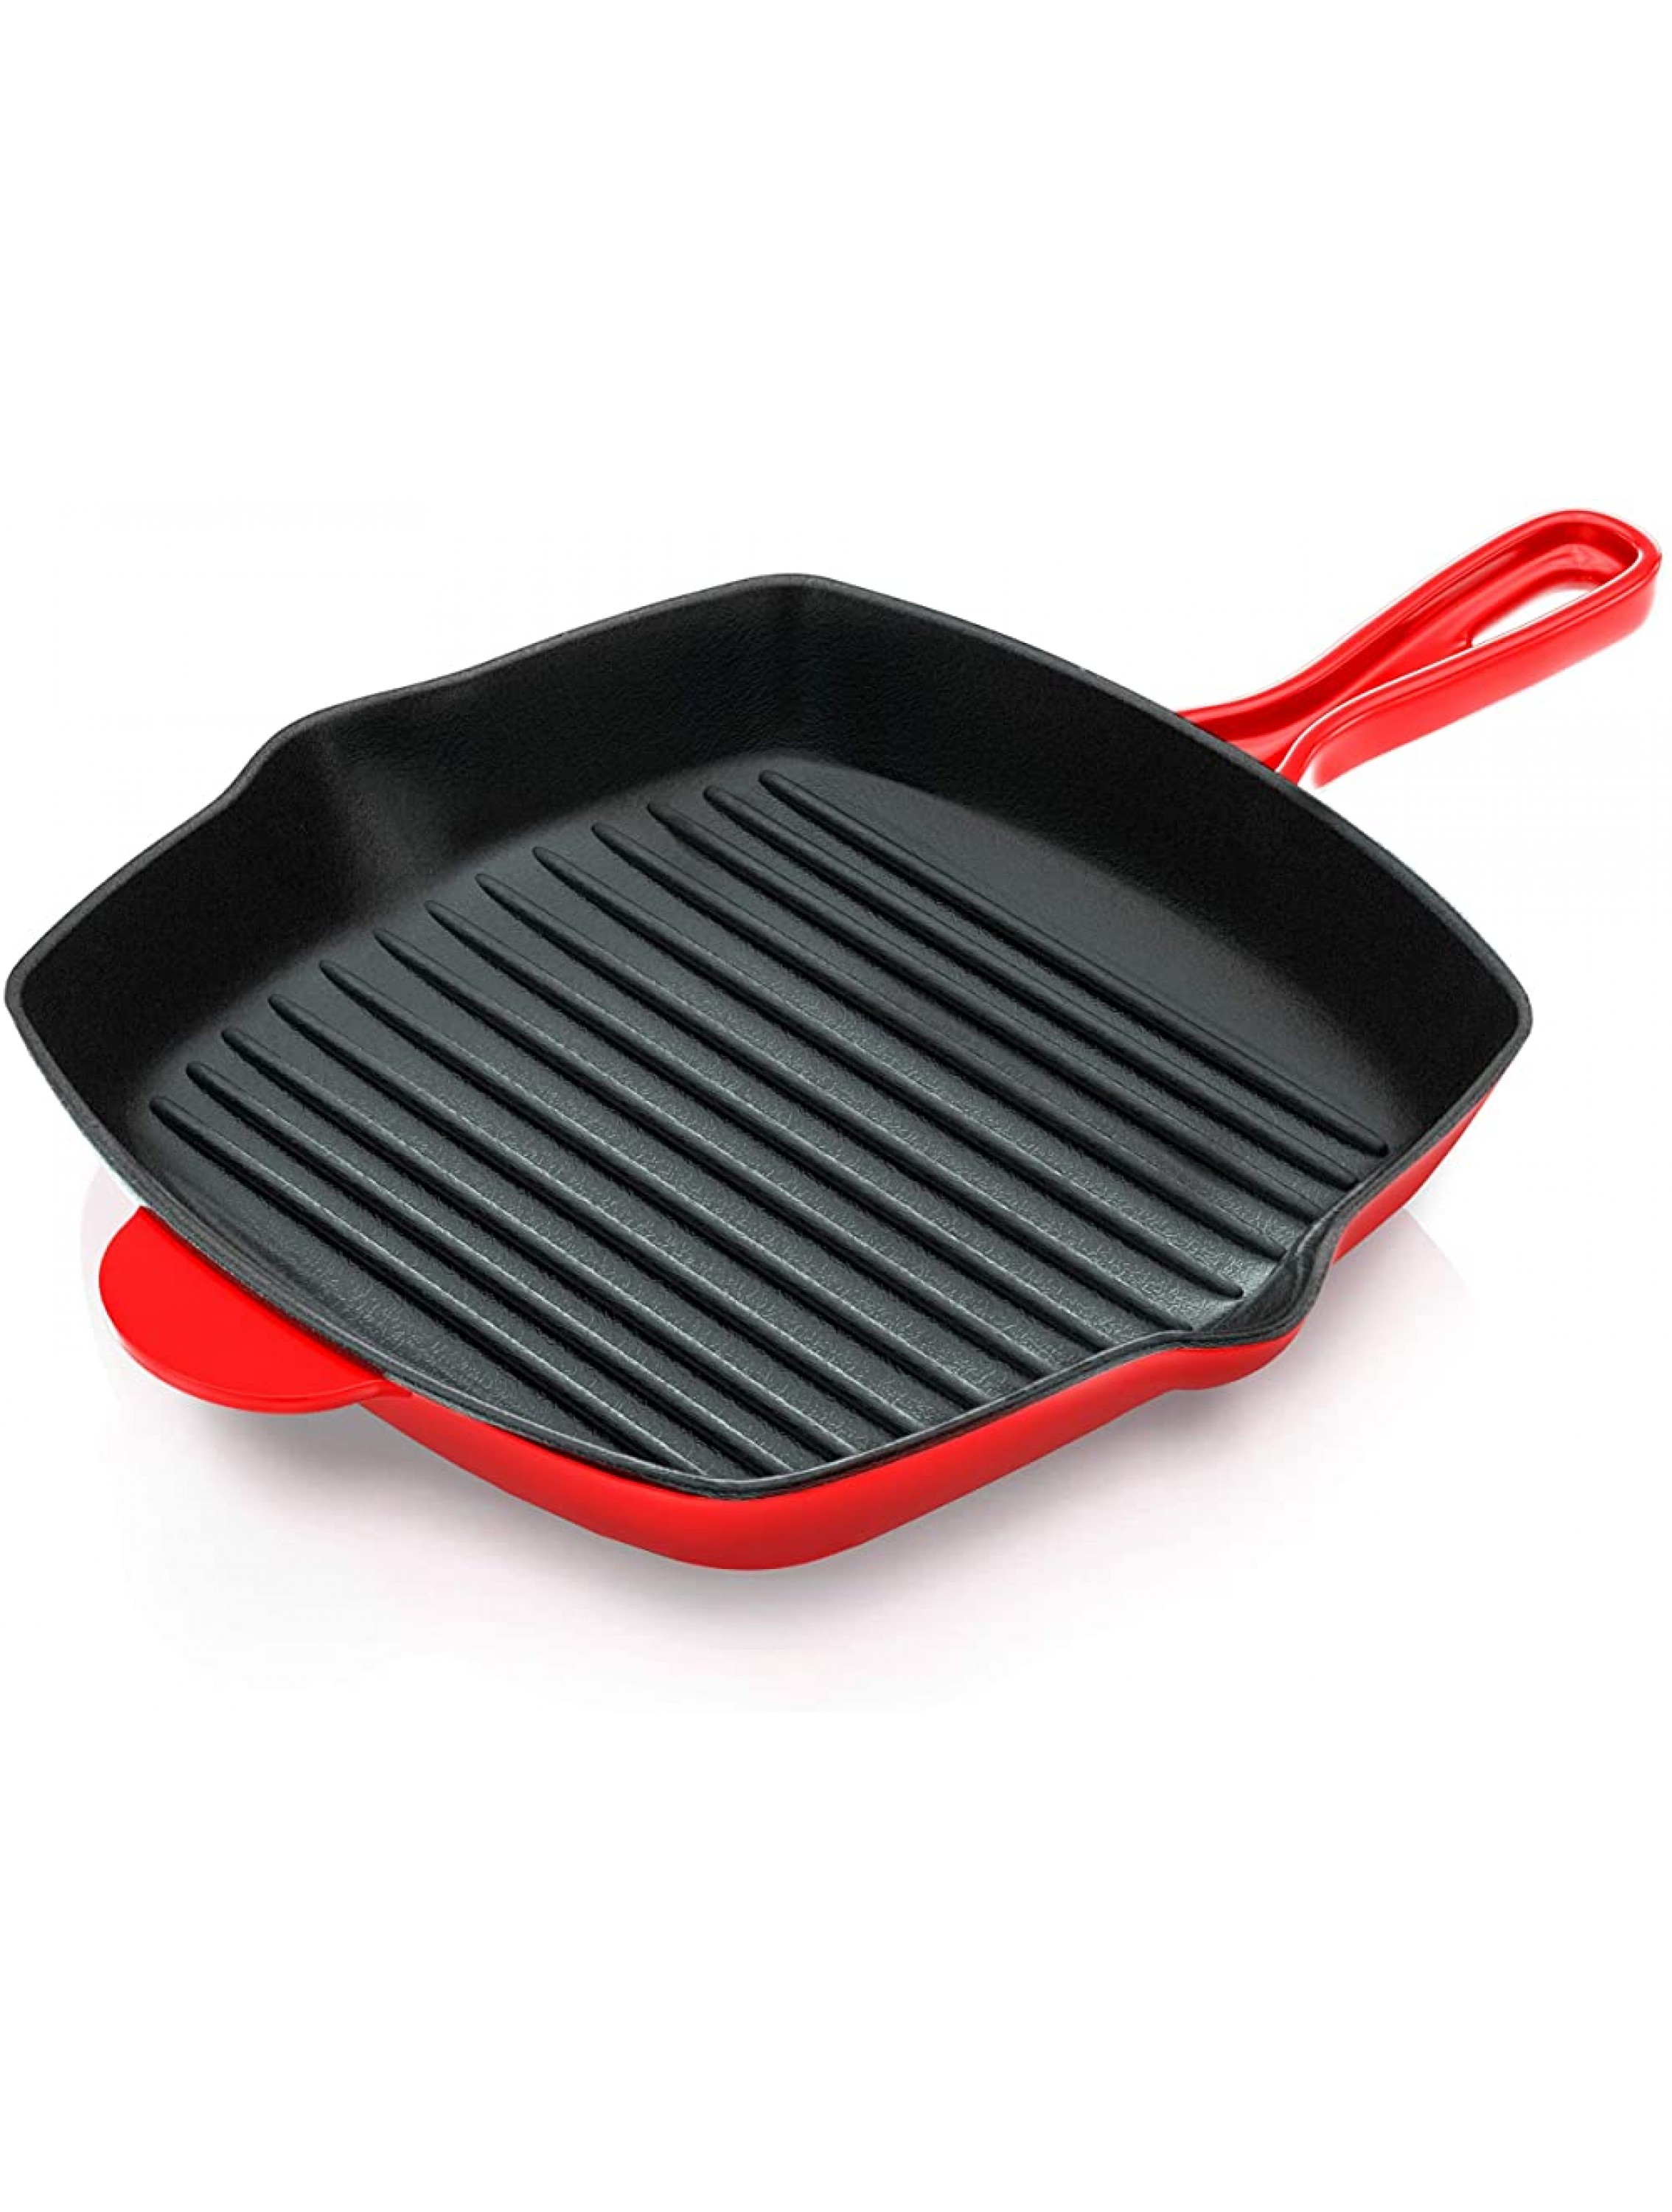 NutriChef Nonstick Cast Iron Grill Pan 11-Inch Kitchen Square Cast Iron Skillet Grilling Pan Enameled Cast Iron Skillet Steak Pan w Side Drip Spout For Electric Stovetop Induction Gas - - BPPVD2O3O